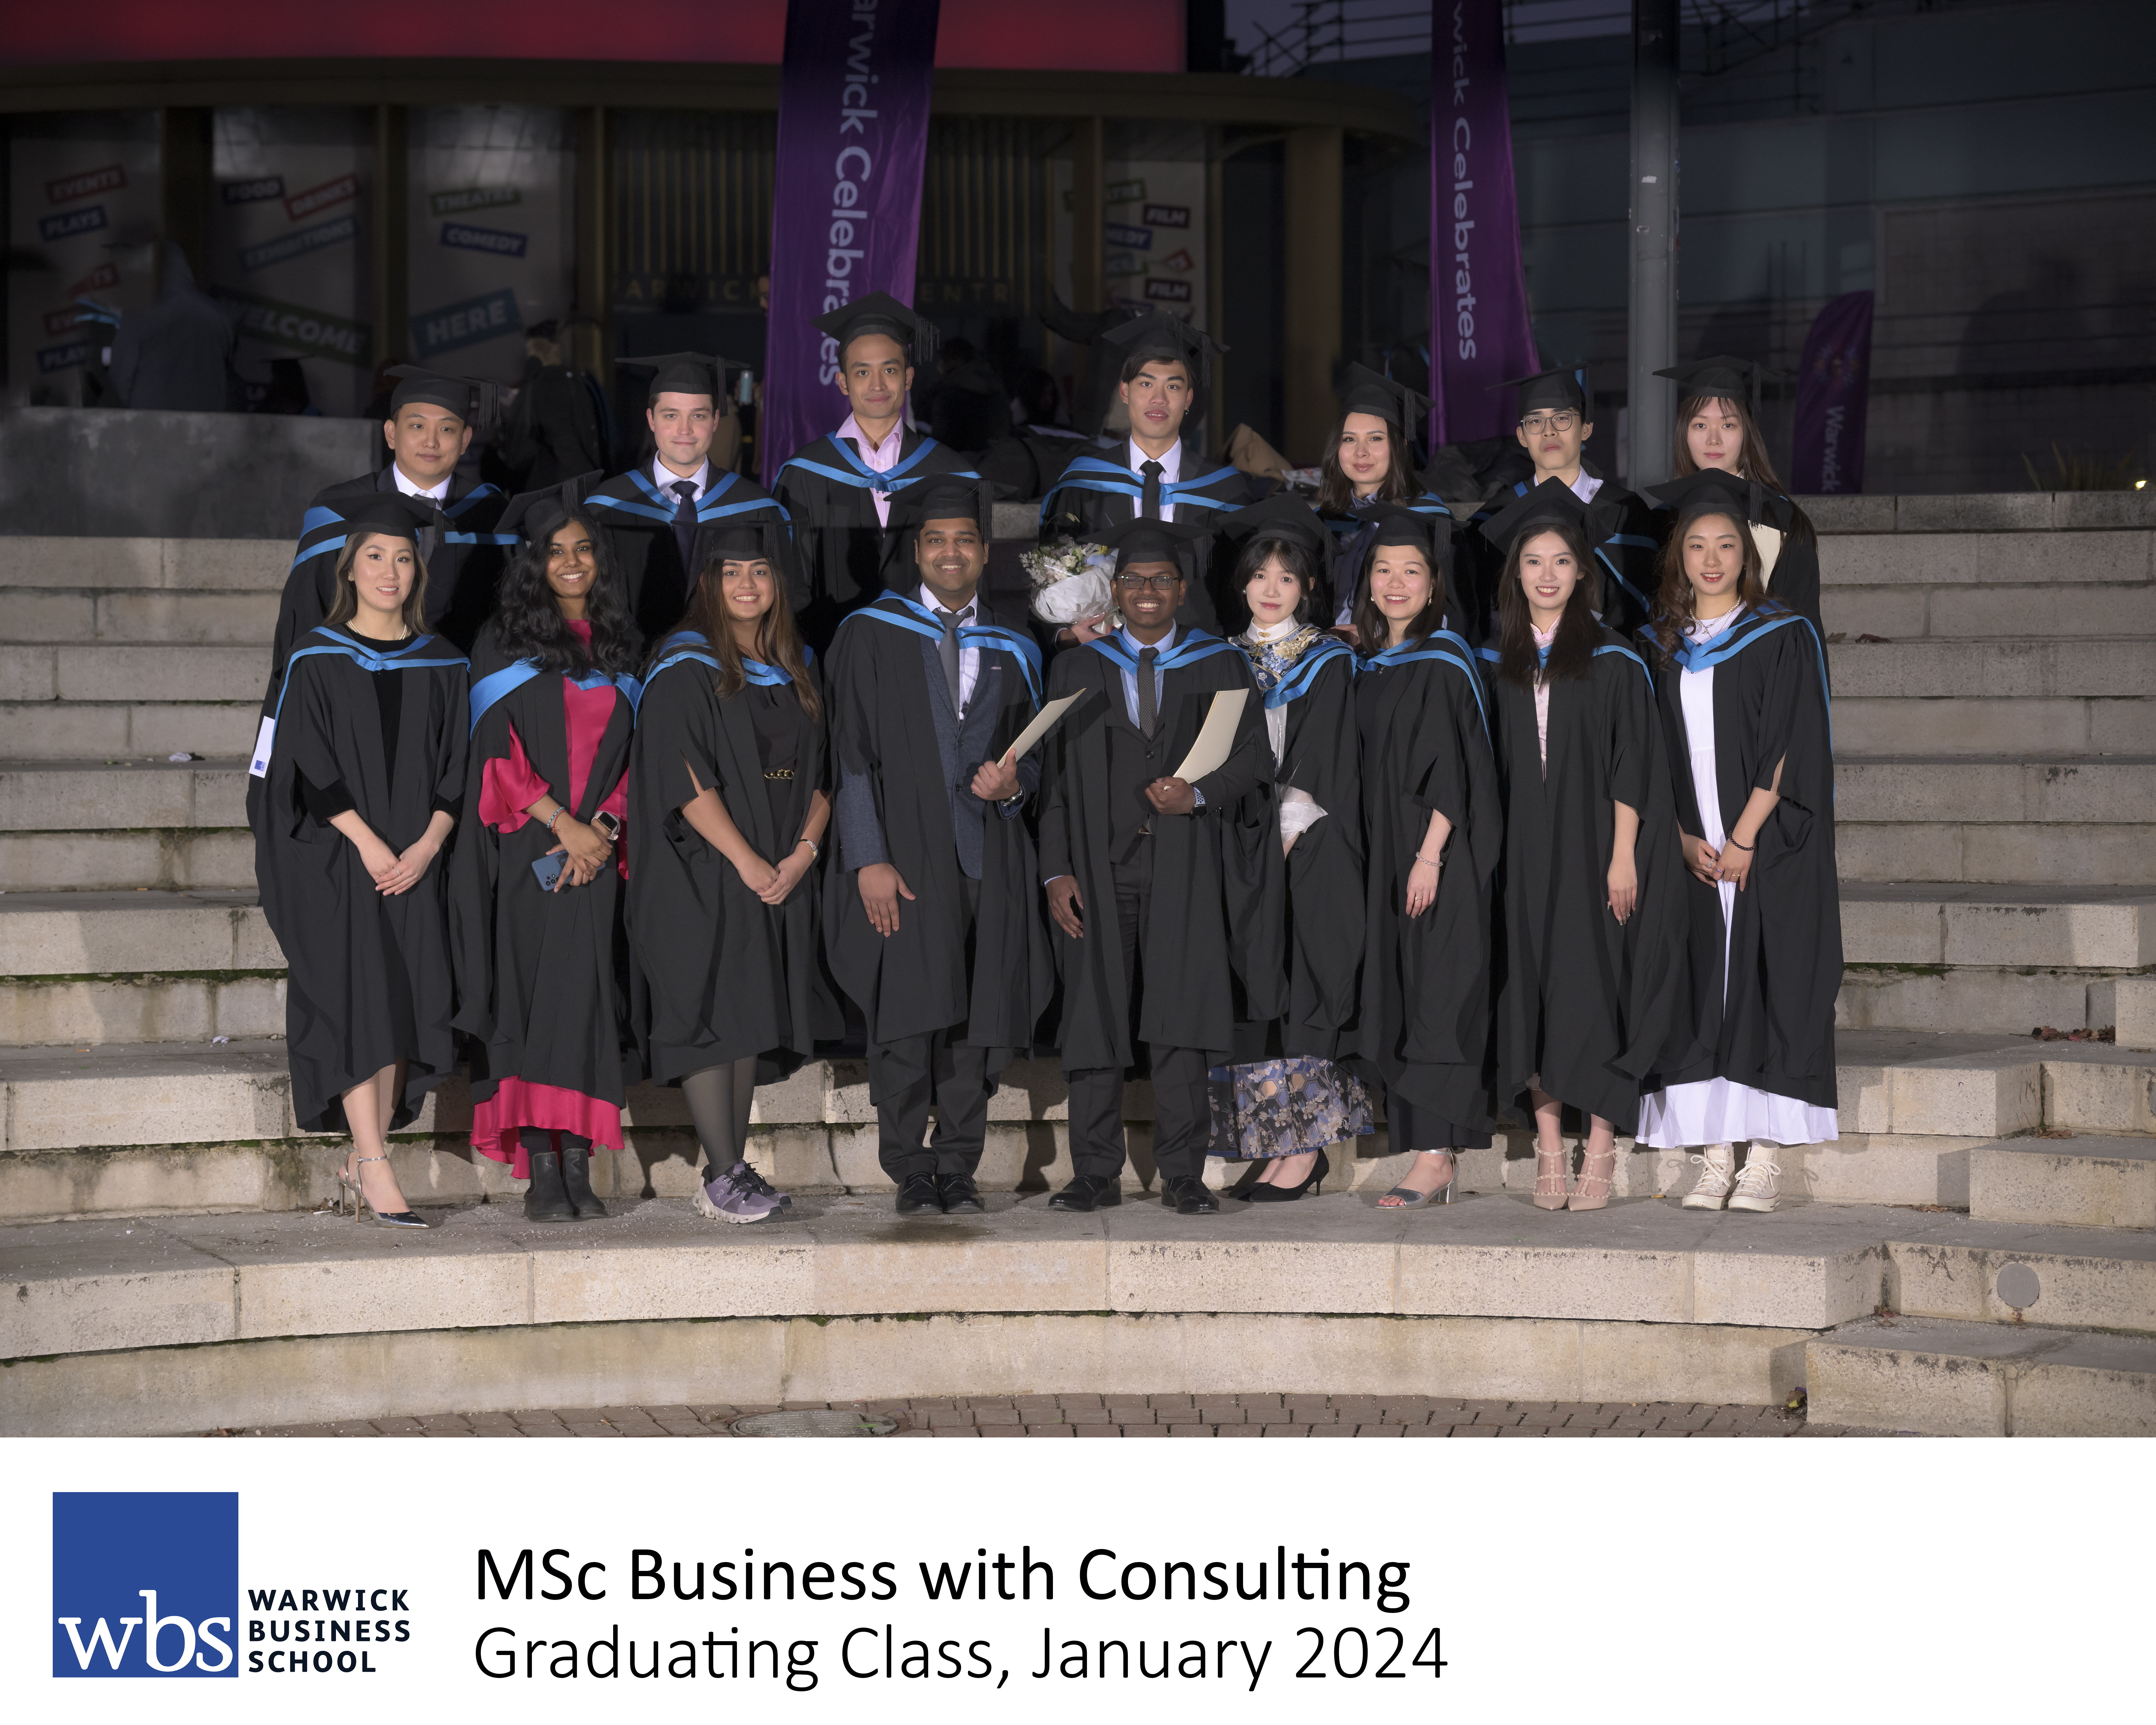 wbs_grad_jan_24_msc_business_with_consulting_captioned.jpg